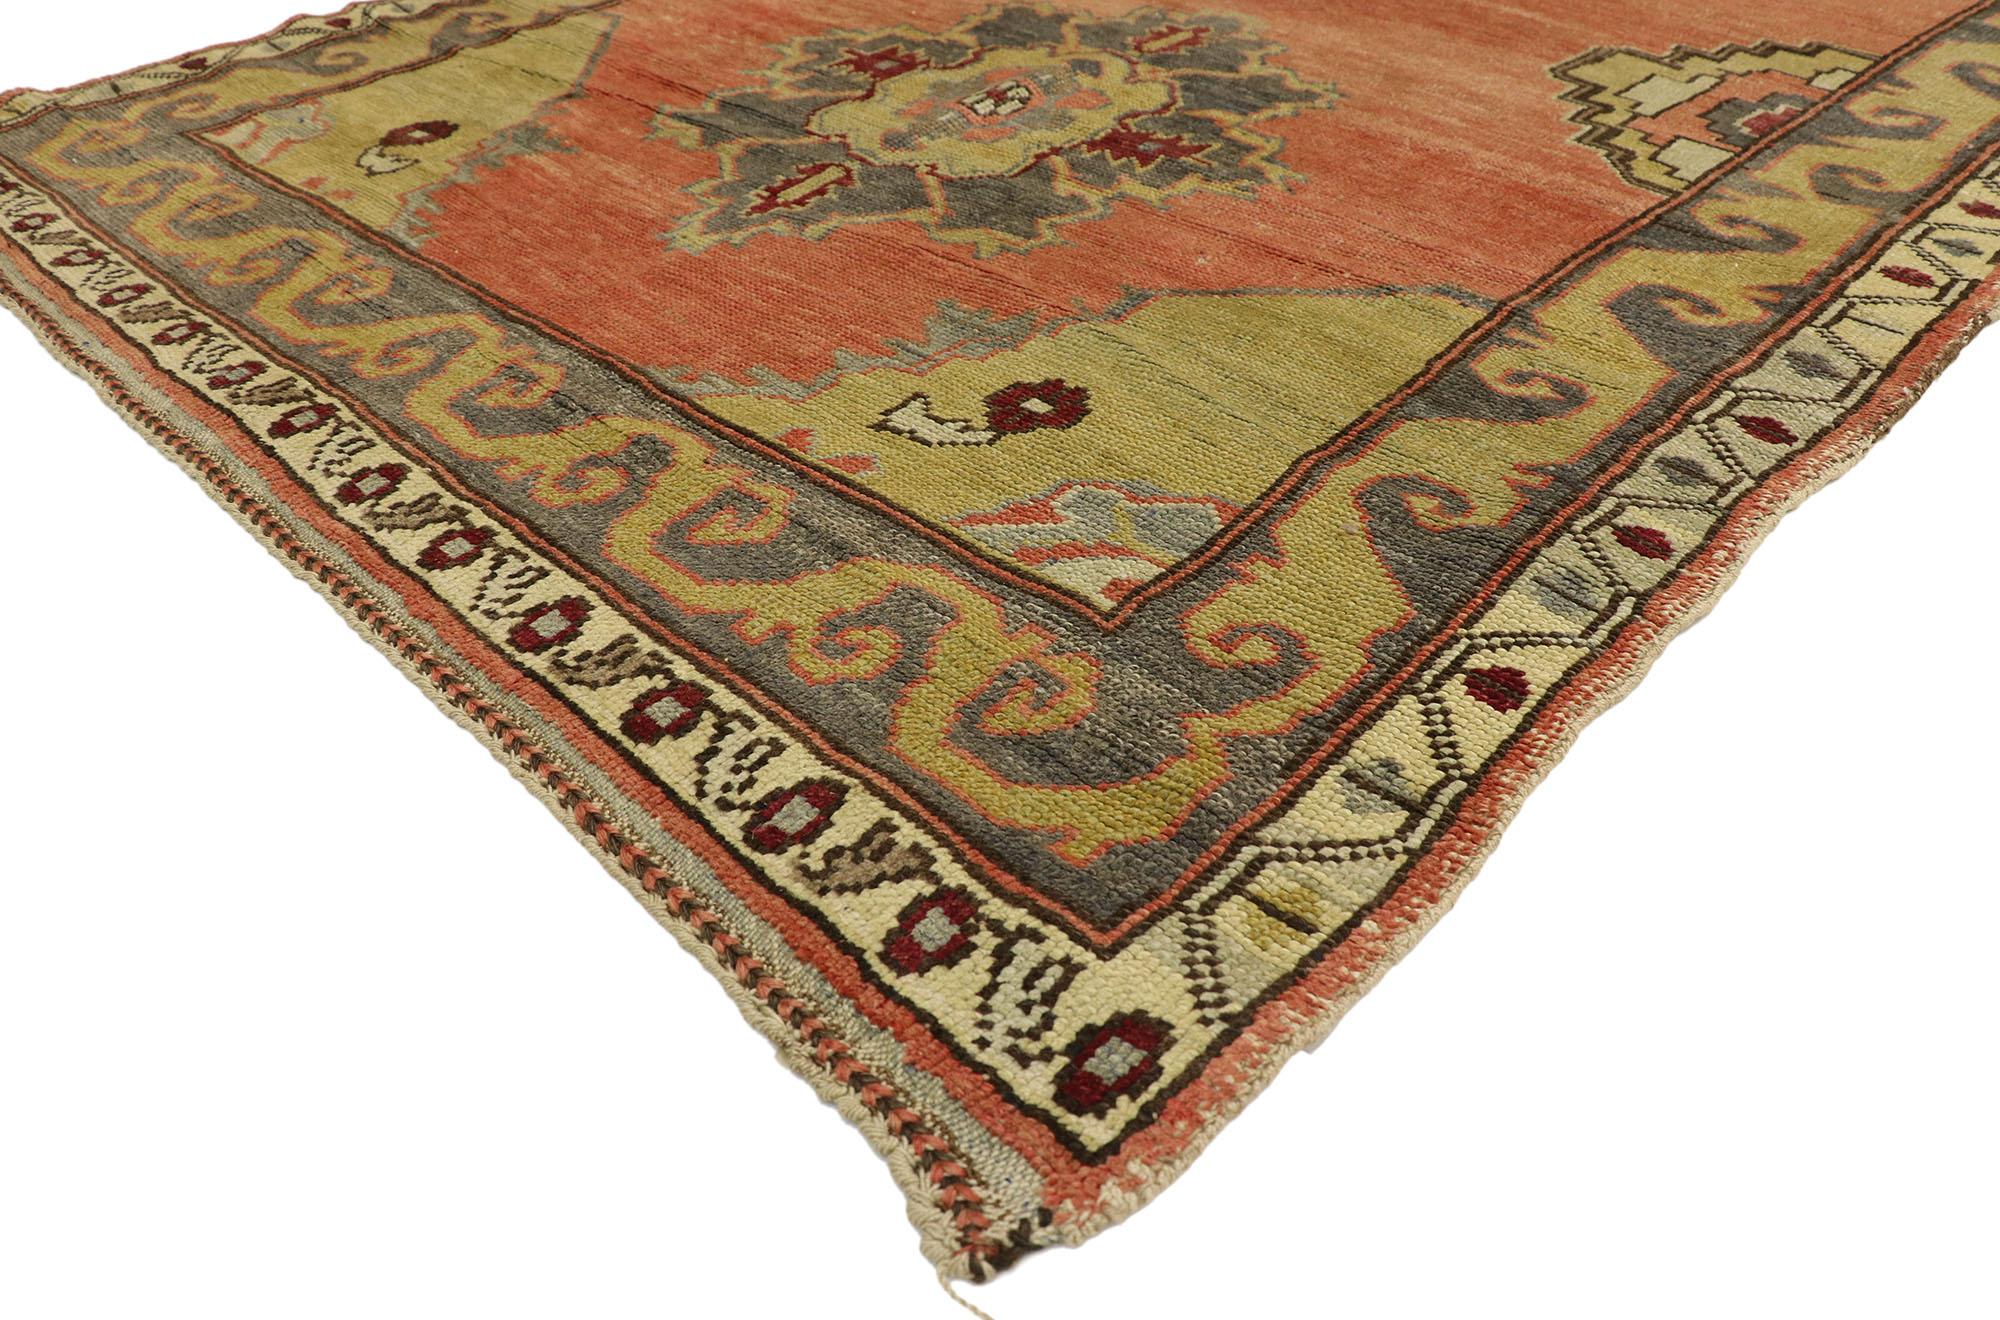 51794-51795, pair of vintage Turkish Oushak runners, matching hallway runners. This pair of matching vintage Turkish Oushak runners each feature columns of four lobed floral medallions spread across abrashed terracotta fields. Stepped geometric